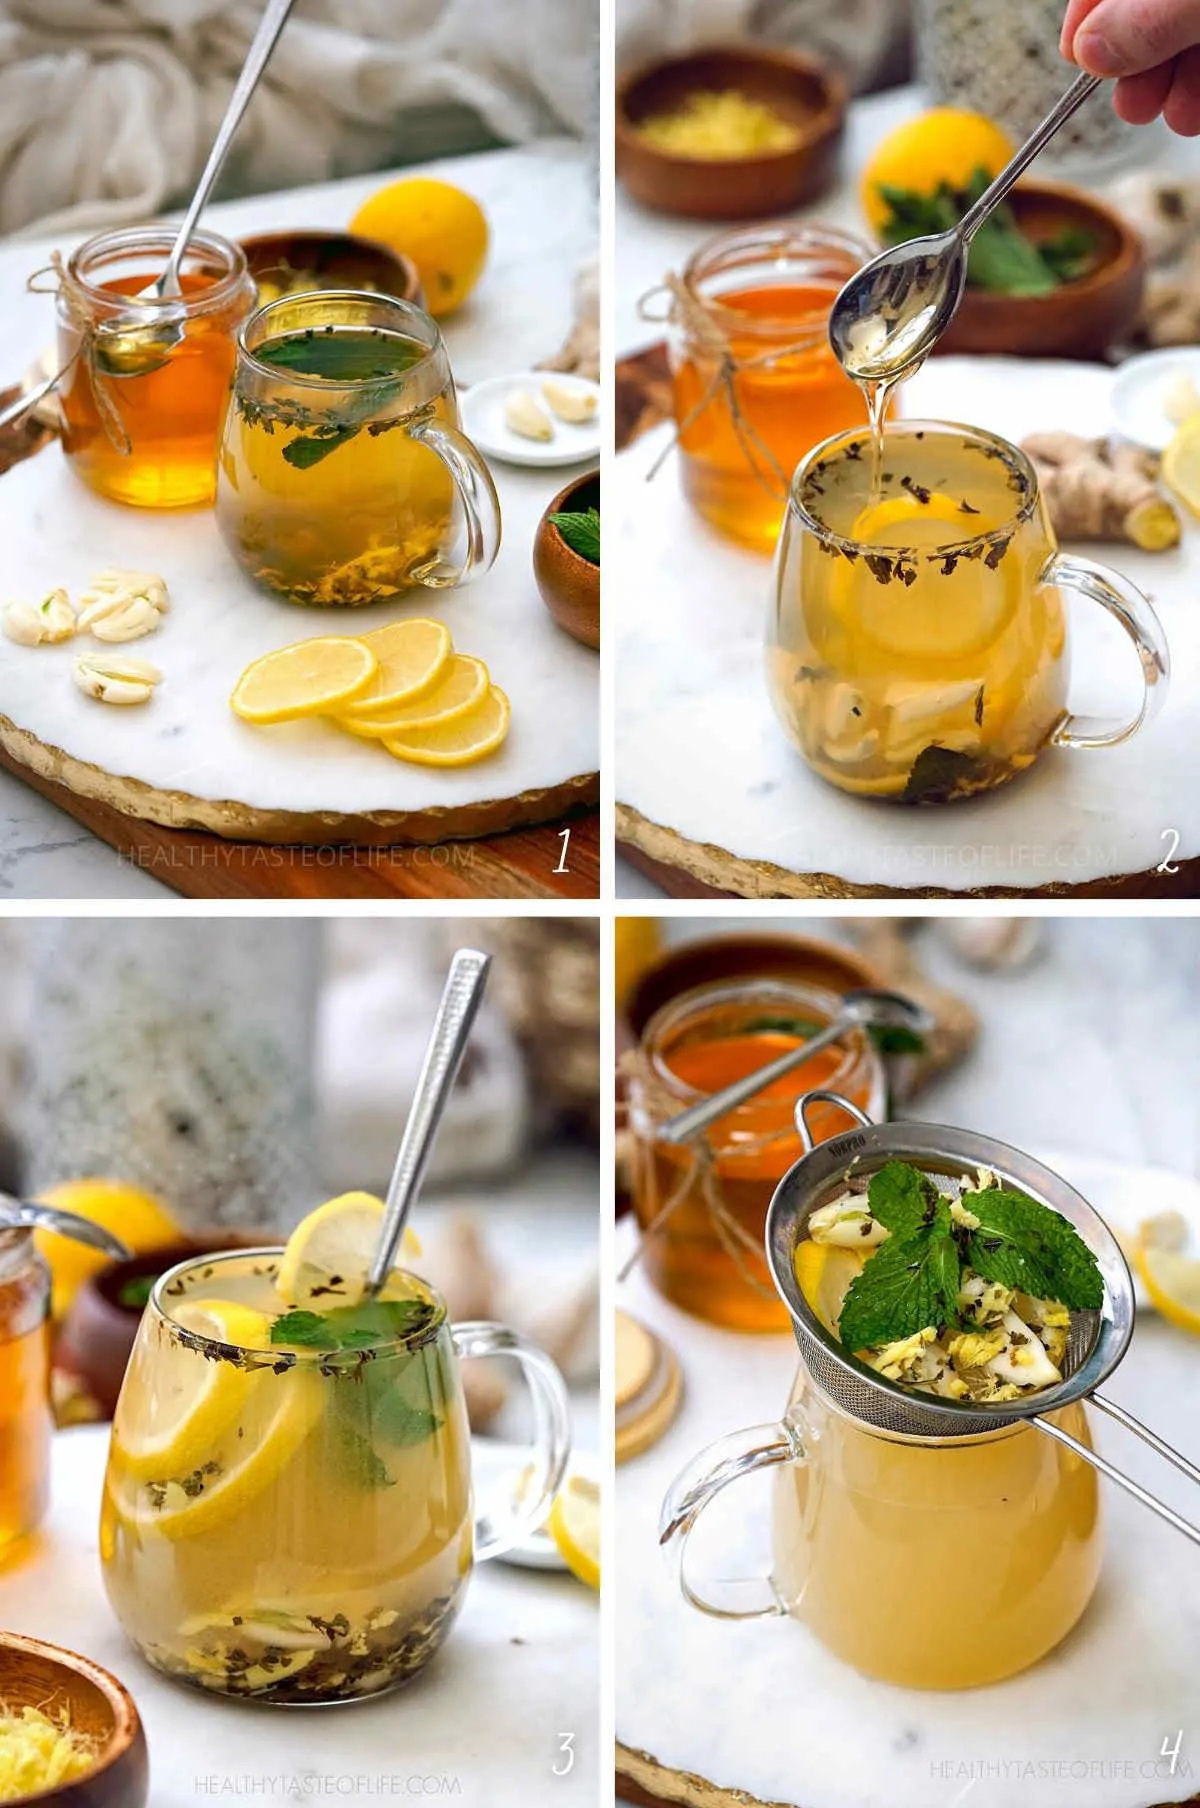 Step by step photos on how to make the flu bomb tea. An immune booster drink for cold and flu with lemon honey ginger garlic and herbs.